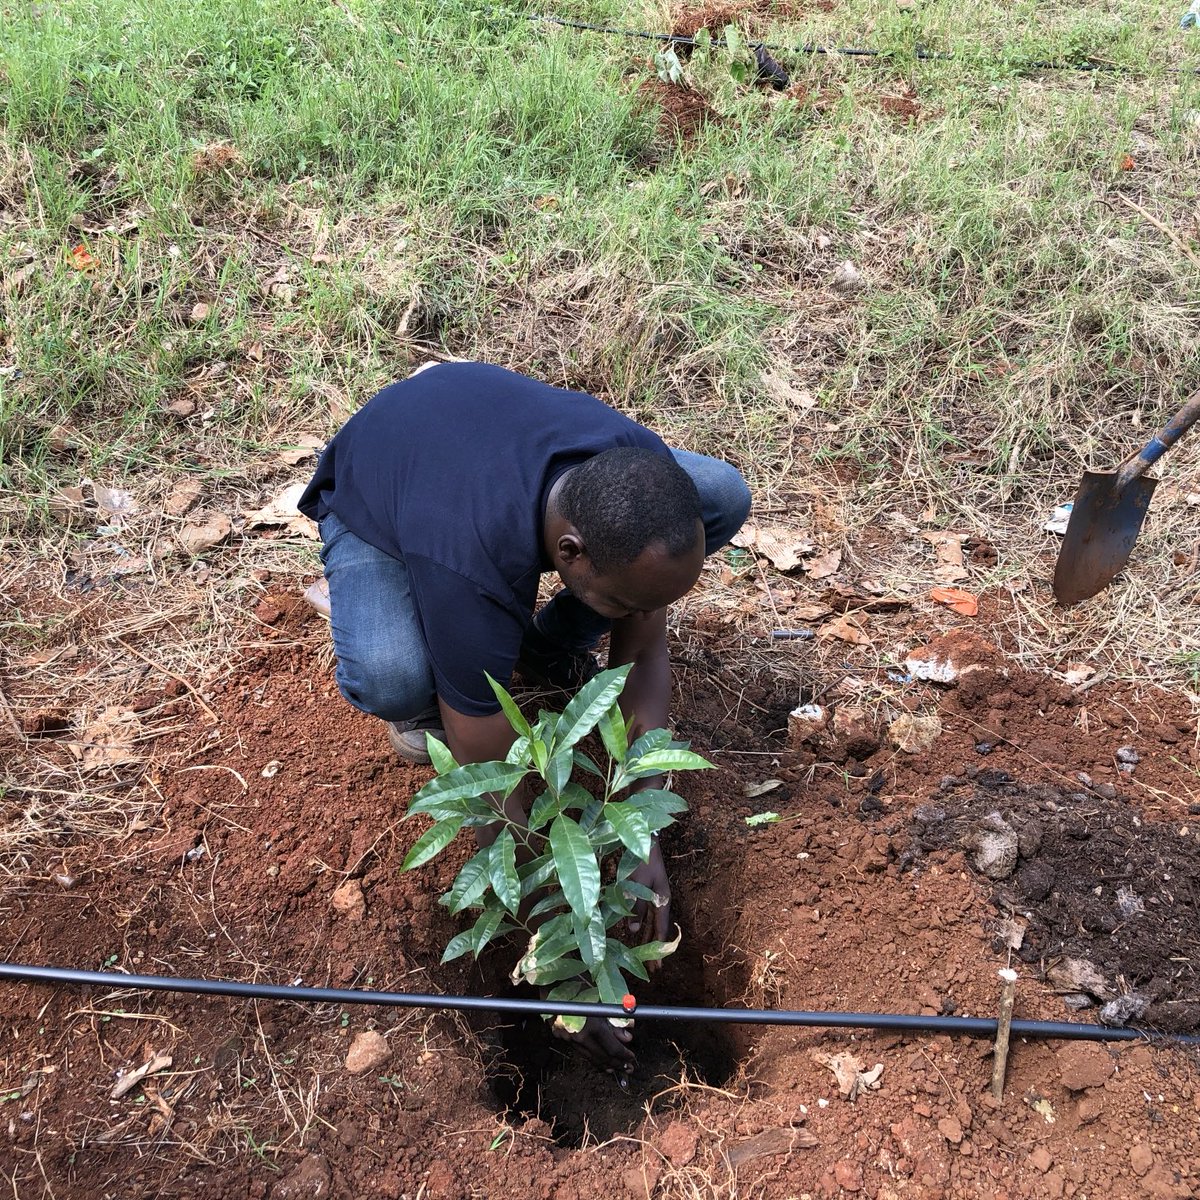 Good morning fam. Where are y'all planting trees from? #TreePlanting